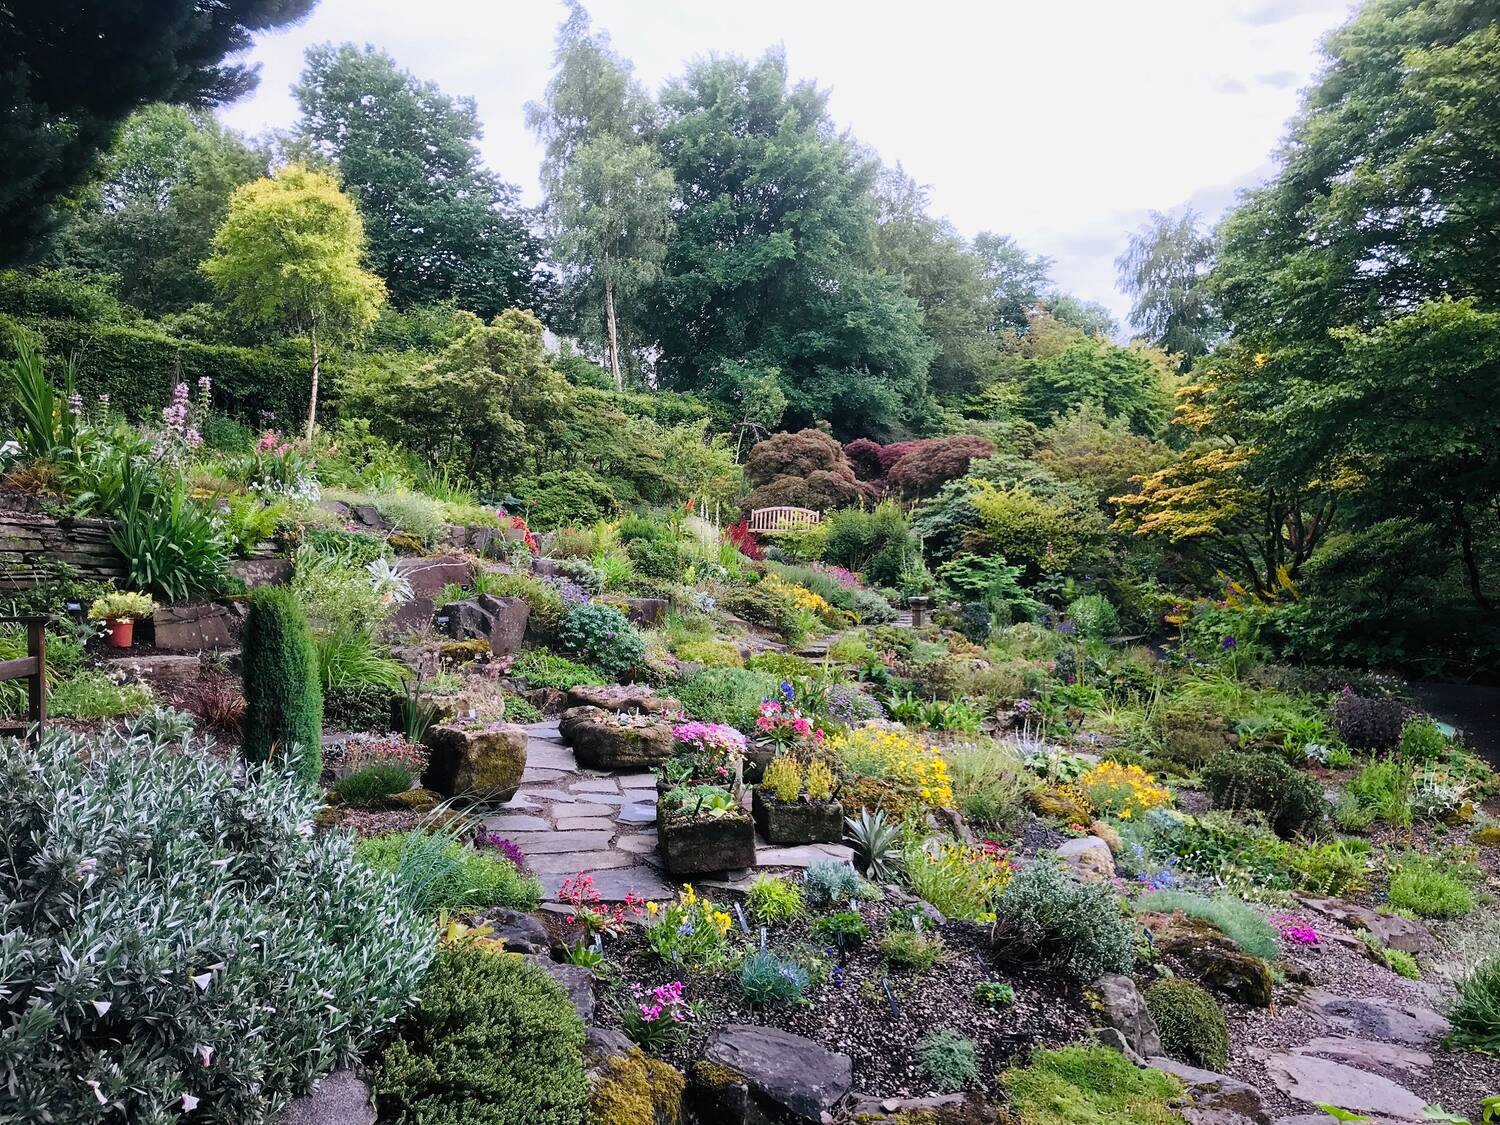 A rock garden is built on a gentle slope, with several terraced paved areas. Small plants are dotted all across the slope, many in flower. A bench sits beside a dark green hedge at the top of the slope.